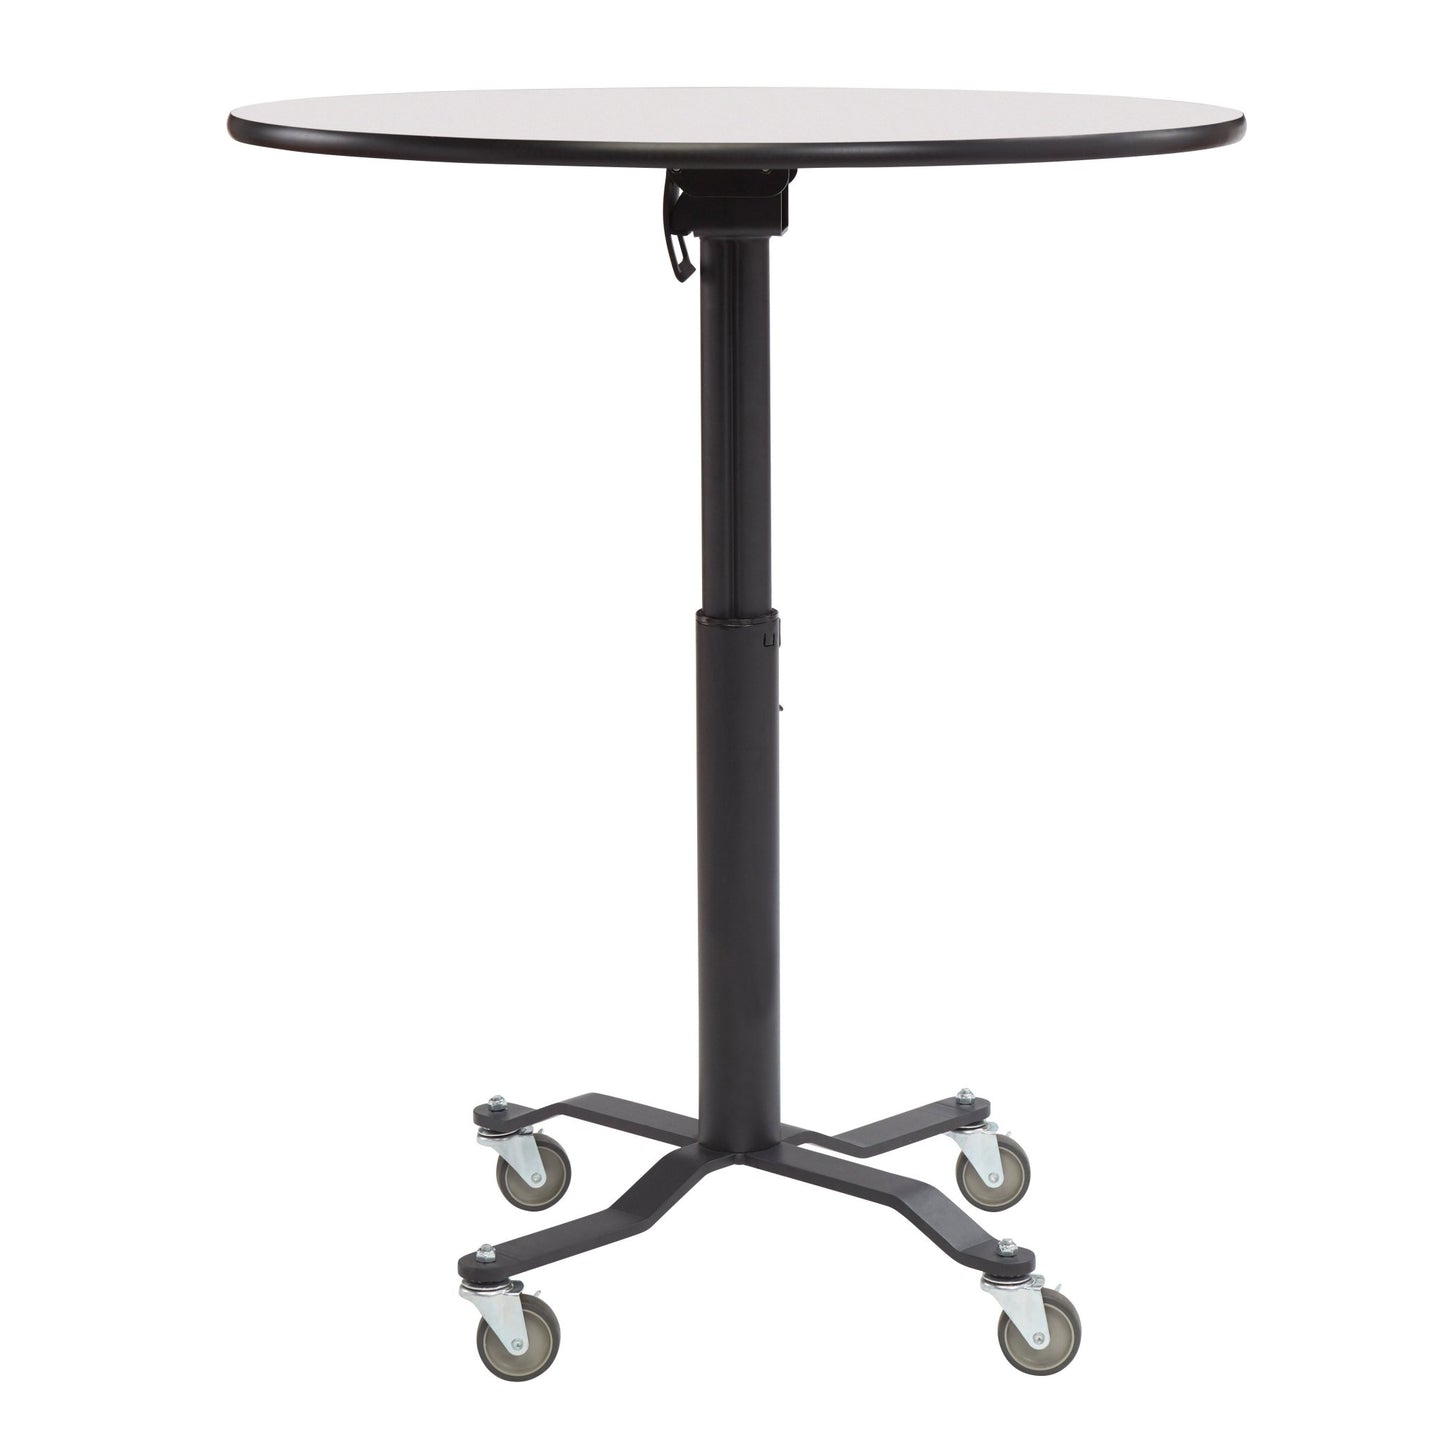 NPS Cafe Time II Table, 30" Round, Whiteboard Top, MDF Core, Protect Edge (NationalPublic Seating NPS-PCT130MDPEWB) - SchoolOutlet